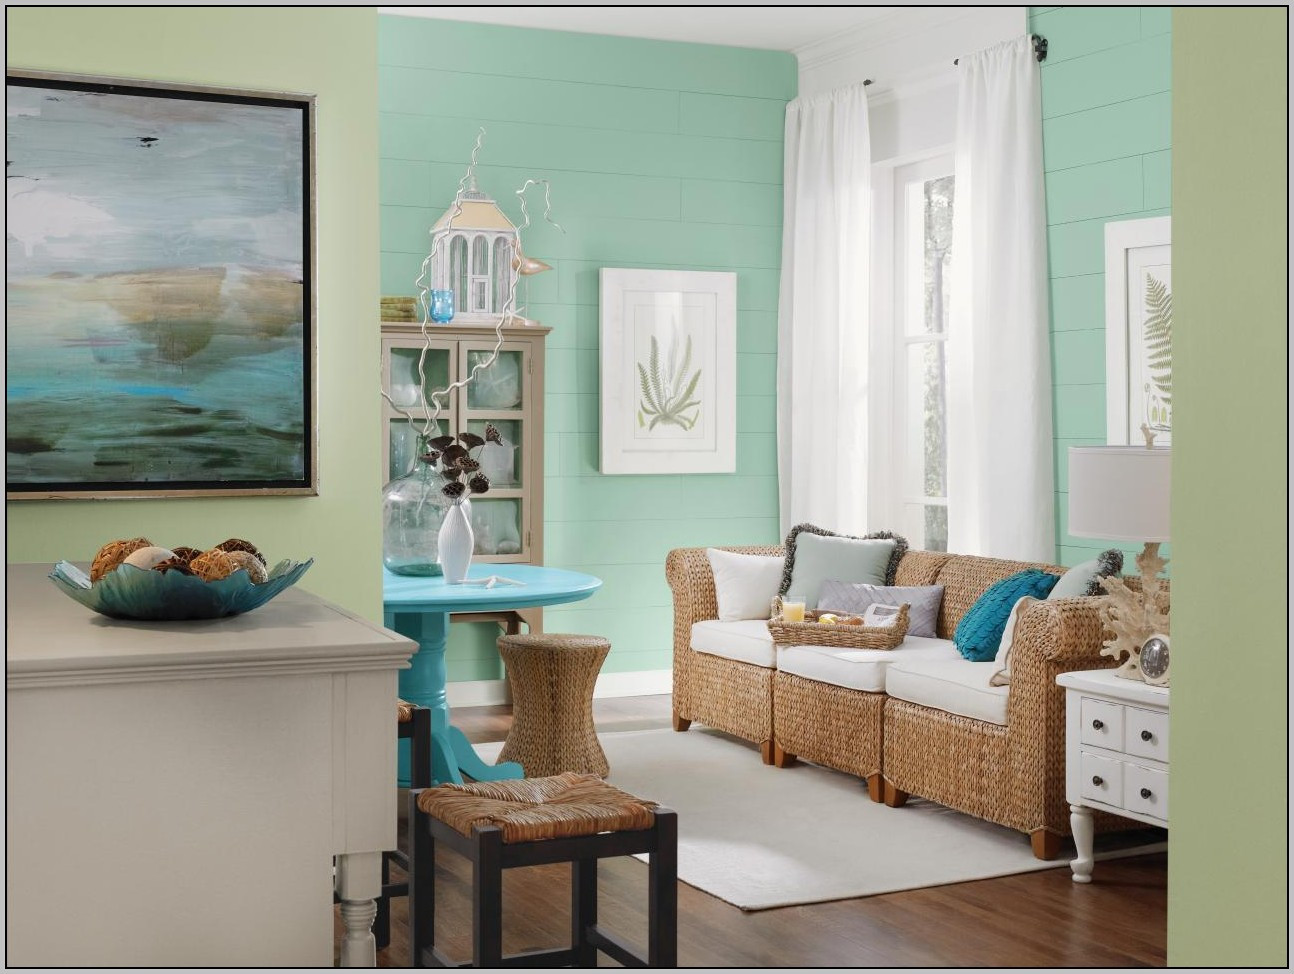 Small Living Room Paint Color
 Are the Living Room Paint Colors Really Important